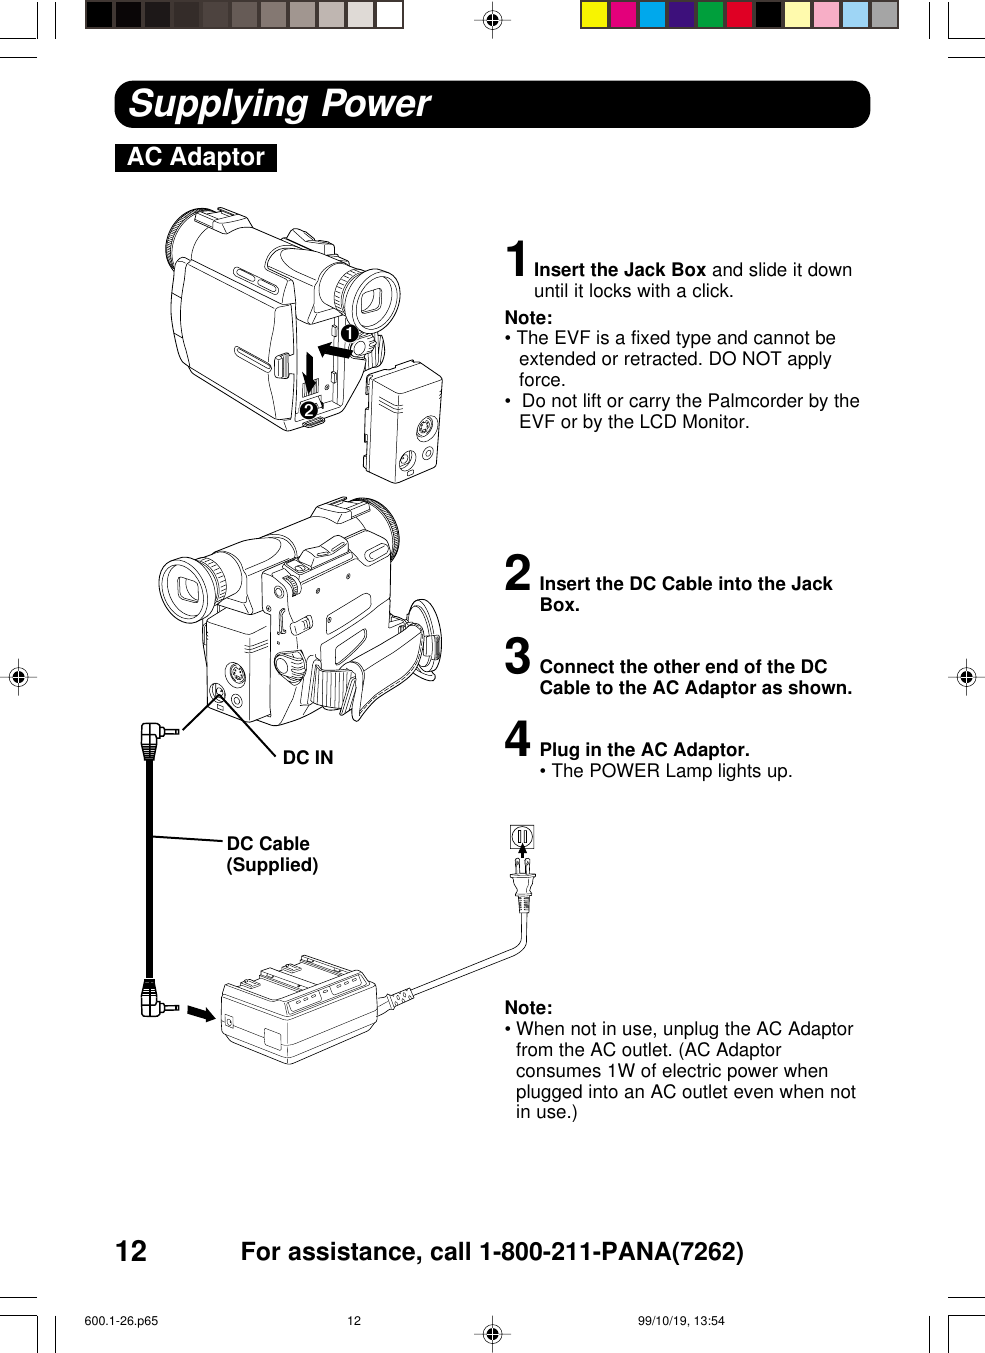 12 For assistance, call 1-800-211-PANA(7262)AC AdaptorSupplying Power1Insert the Jack Box and slide it downuntil it locks with a click.Note:• The EVF is a fixed type and cannot beextended or retracted. DO NOT applyforce.•  Do not lift or carry the Palmcorder by theEVF or by the LCD Monitor.2Insert the DC Cable into the JackBox.3Connect the other end of the DCCable to the AC Adaptor as shown.4Plug in the AC Adaptor.•The POWER Lamp lights up.Note:•When not in use, unplug the AC Adaptorfrom the AC outlet. (AC Adaptorconsumes 1W of electric power whenplugged into an AC outlet even when notin use.)DC Cable(Supplied)DC IN➋➊600.1-26.p65 99/10/19, 13:5412